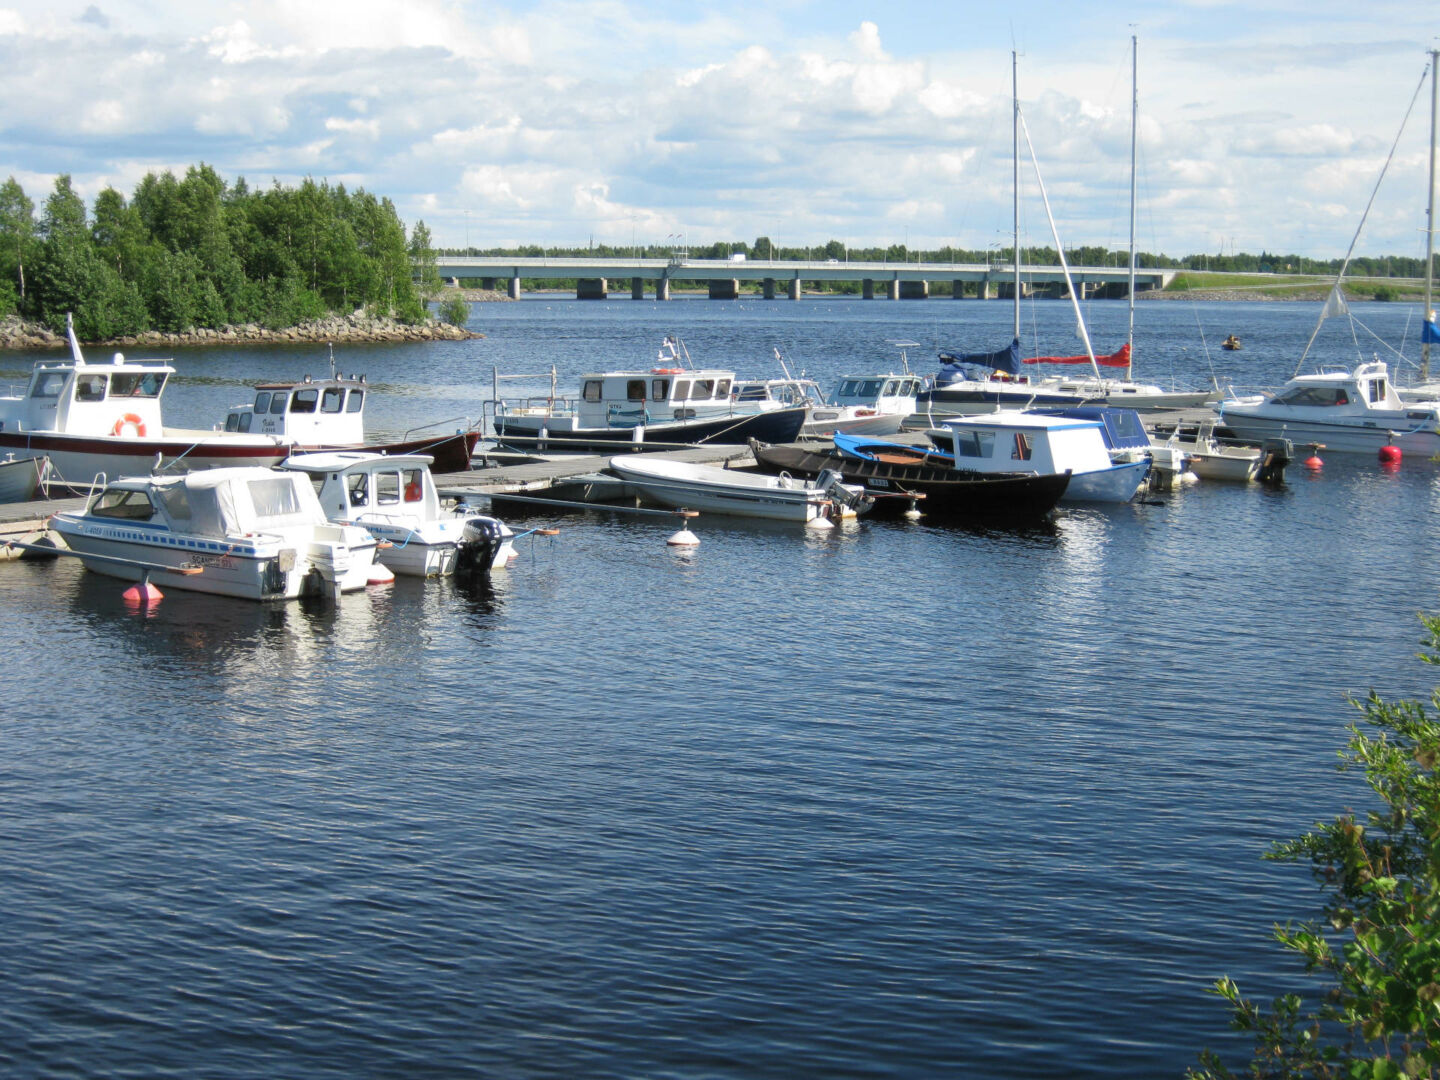 The inner harbor of Keminmaa, Finland, in retro and rural Sea Lapland